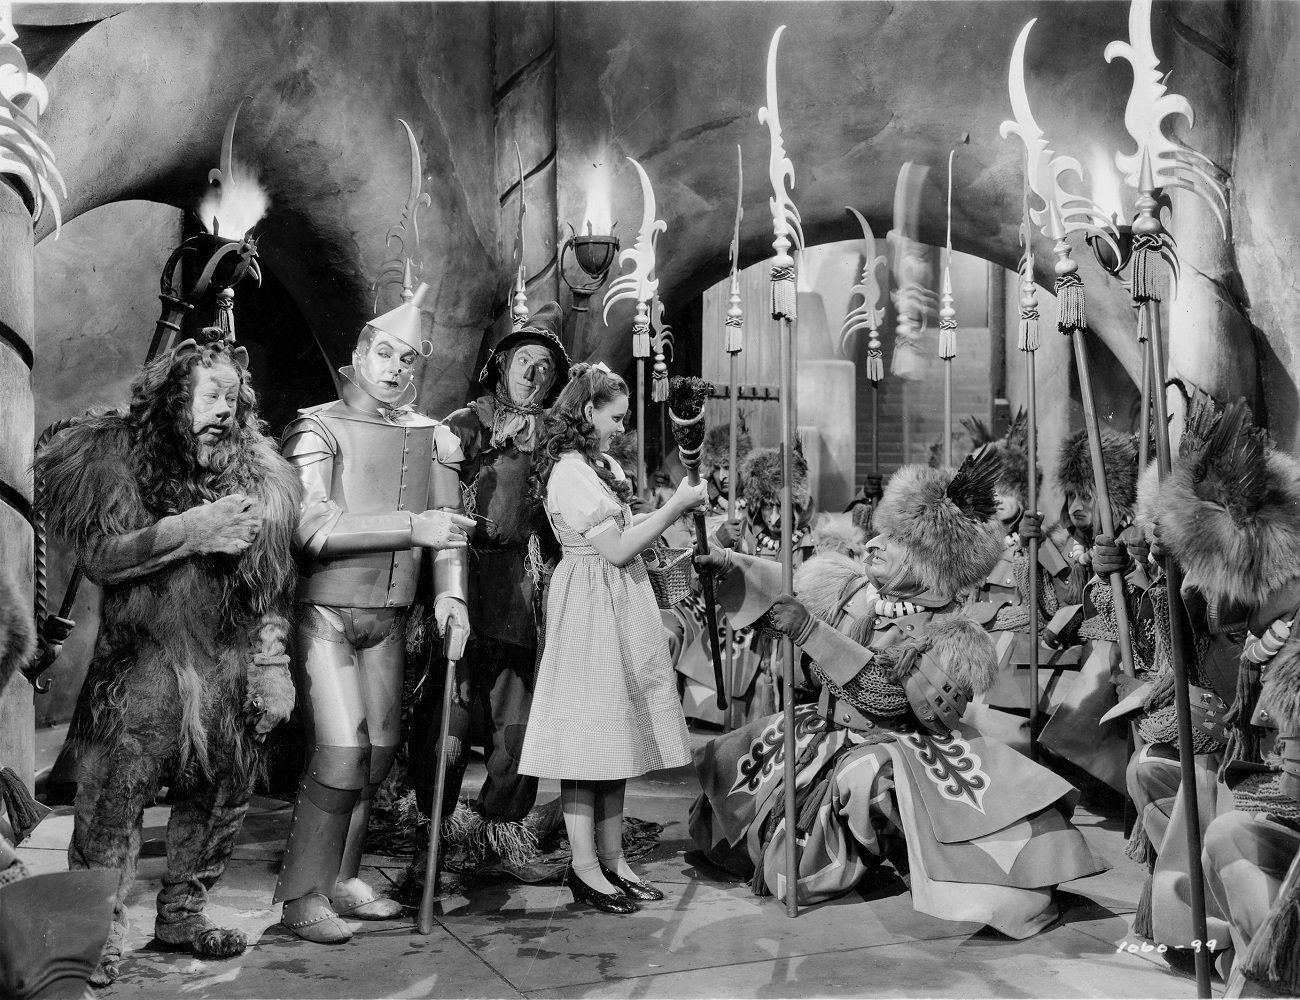 Bert Lahr, Jack Haley, Ray Bolger and Judy Garland in The wizard of Oz, 1939